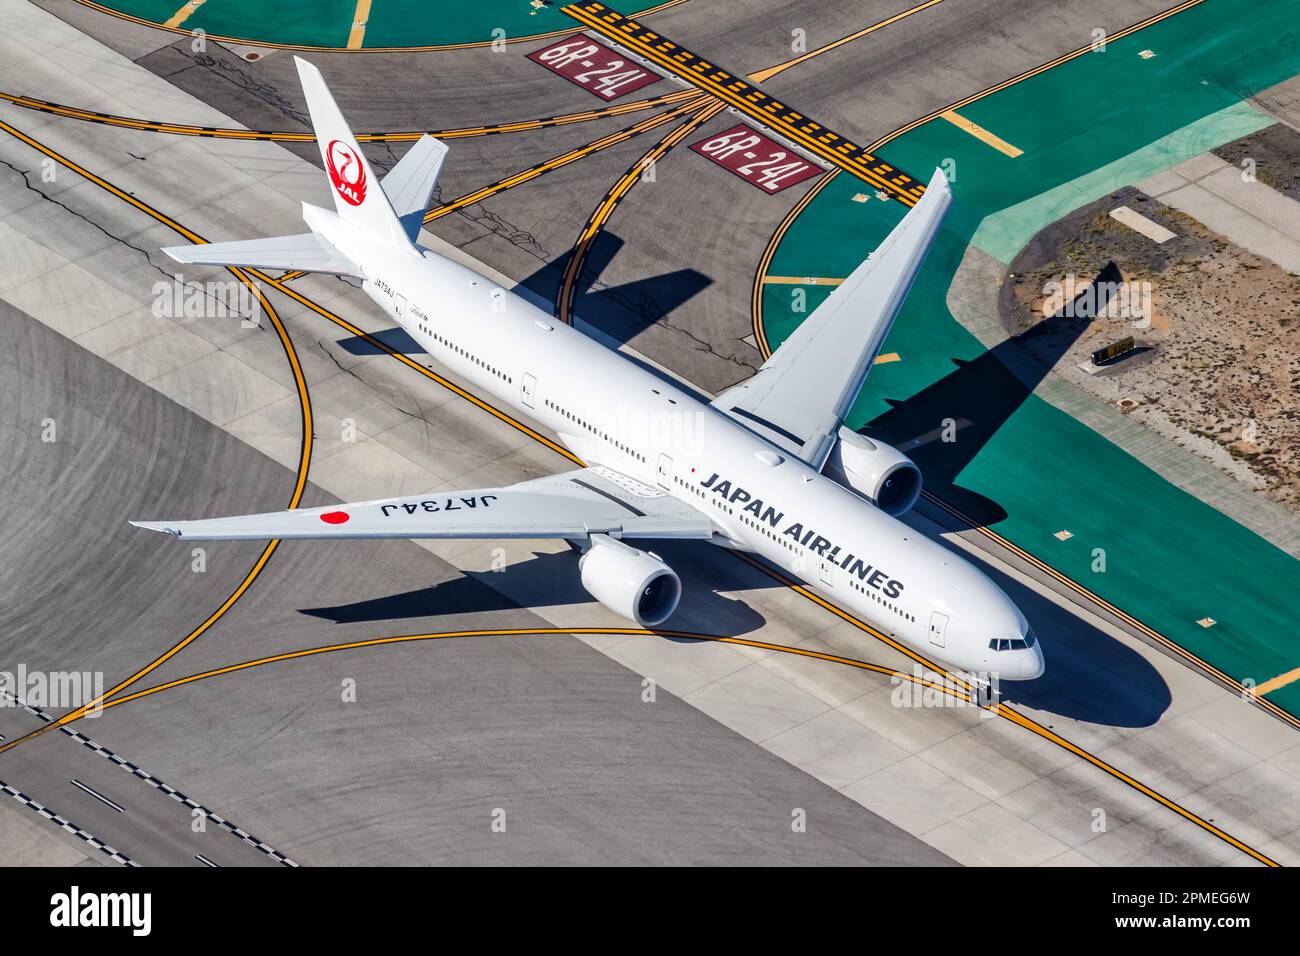 Los Angeles, United States – November 4, 2022: Japan Airlines Boeing 777-300(ER) airplane aerial photo at Los Angeles airport (LAX) in the United Stat Stock Photo